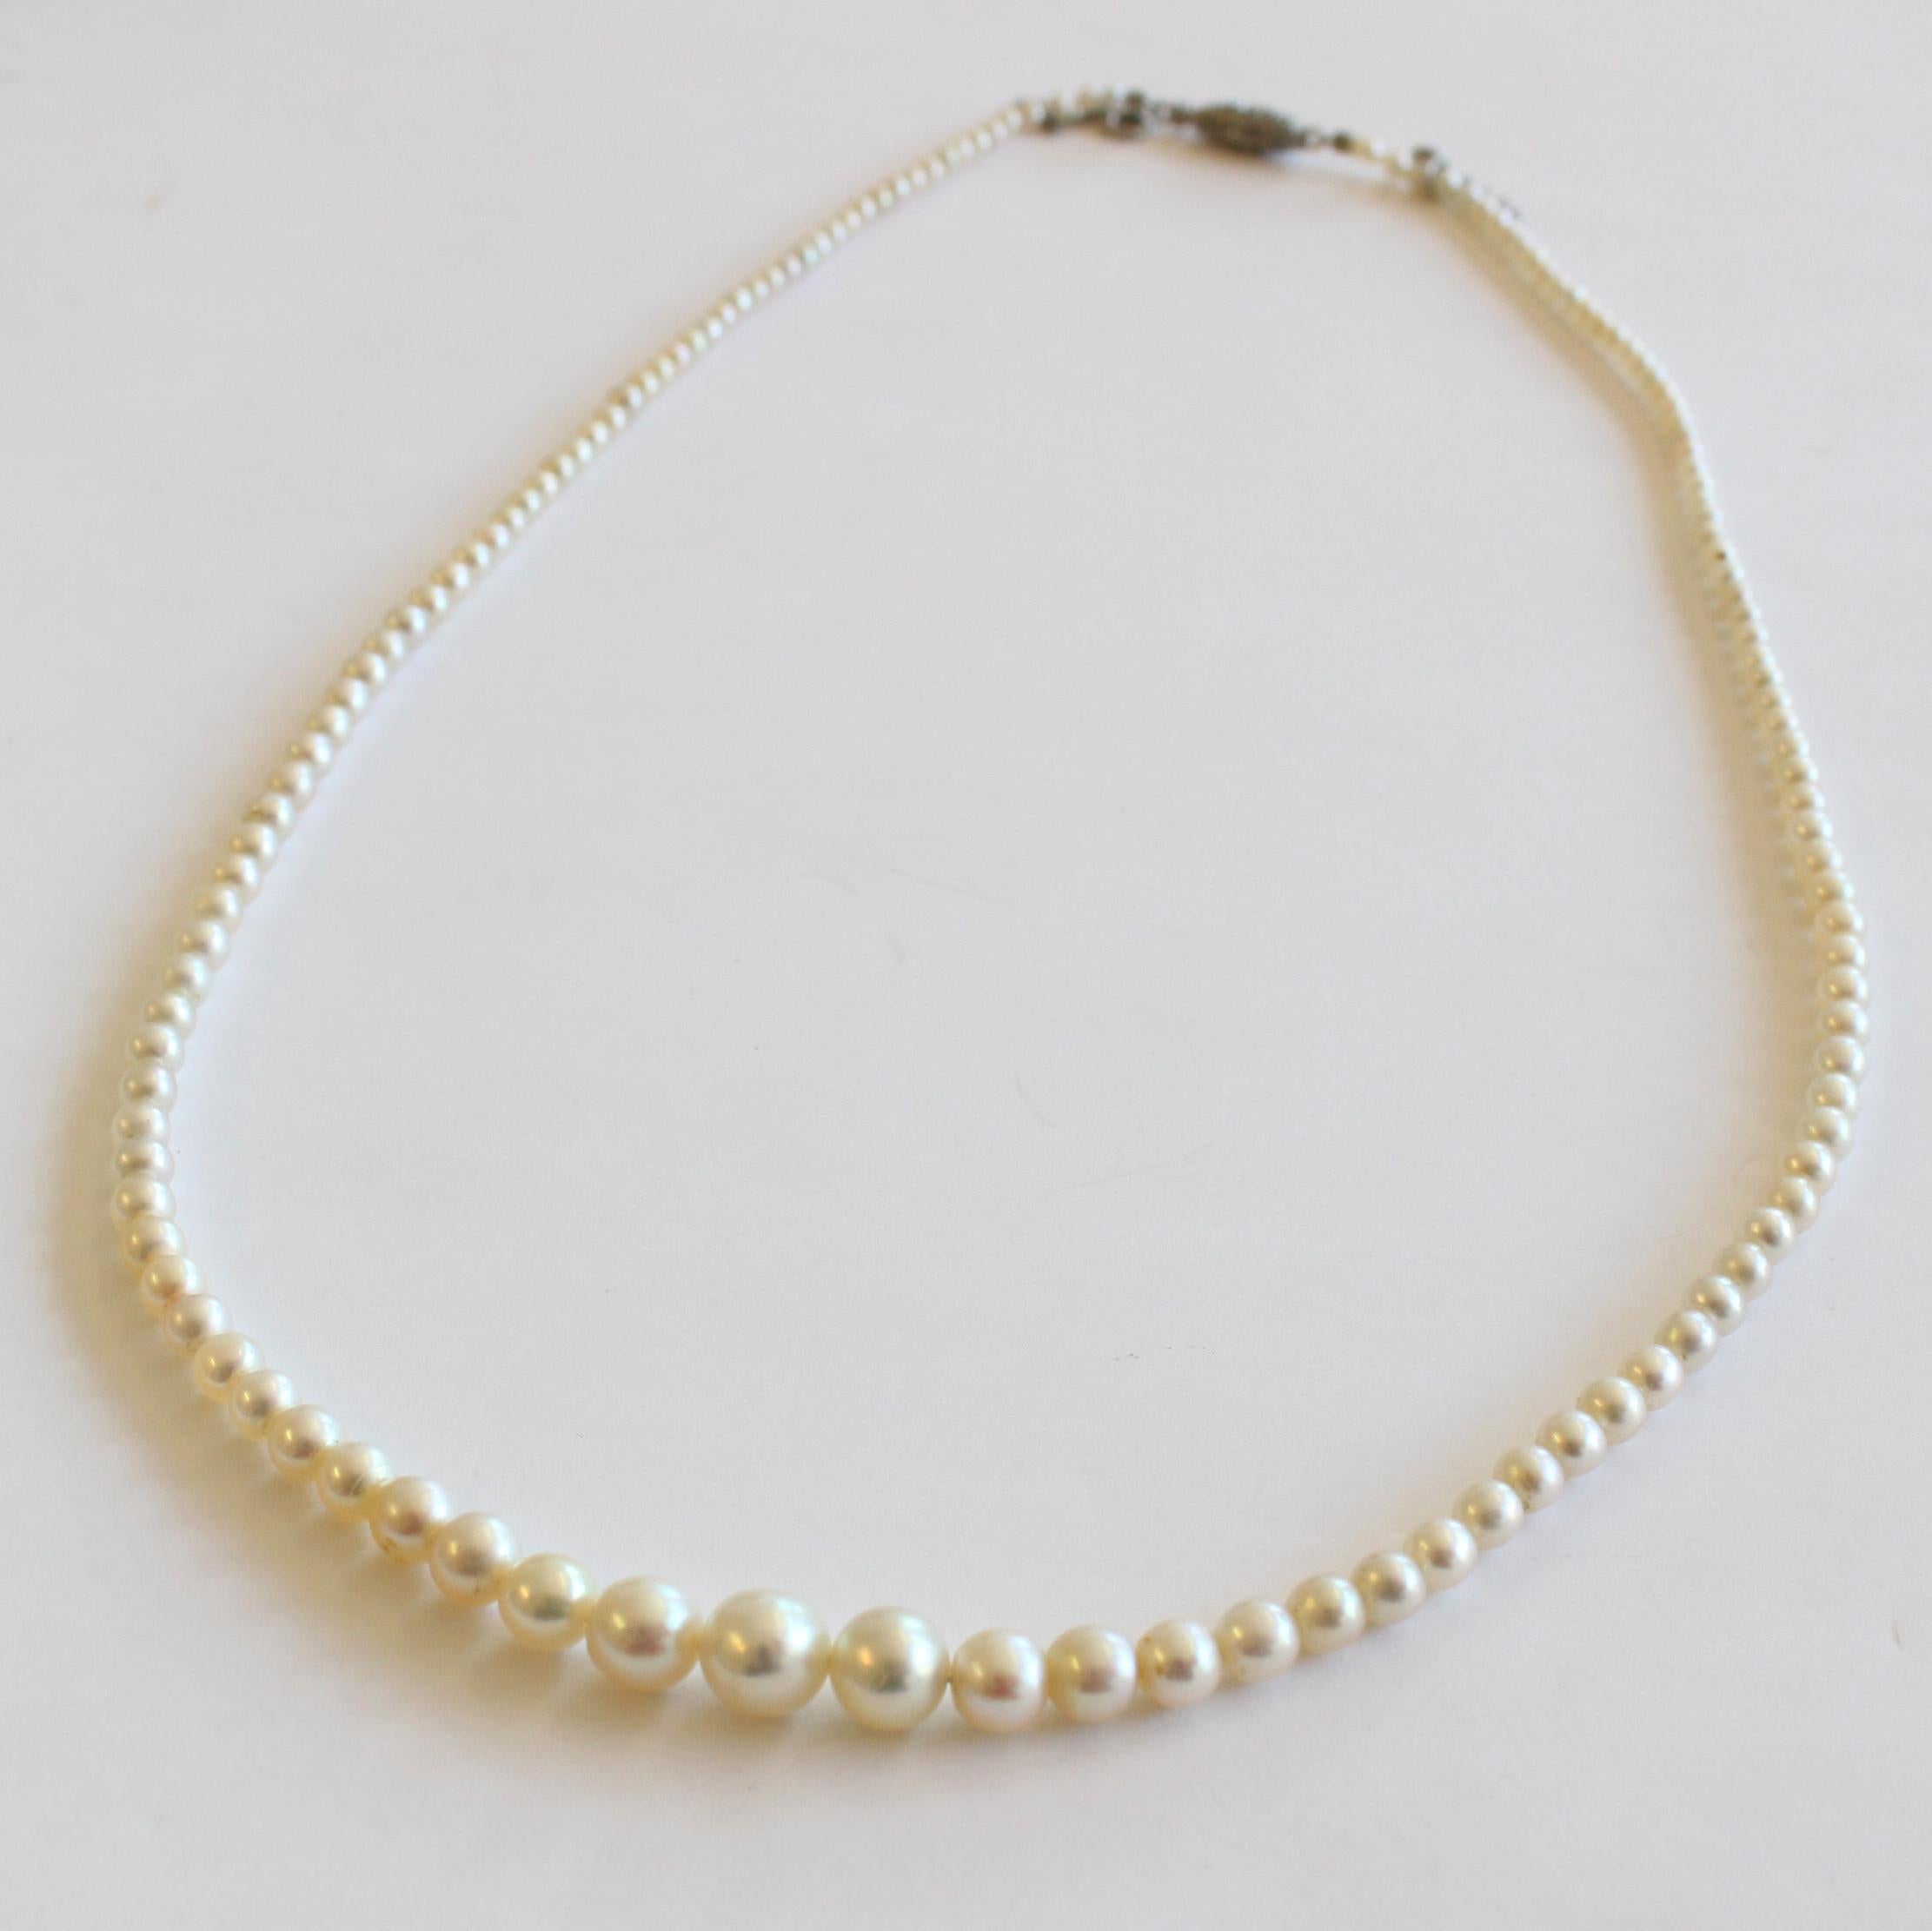 A Fine Antique Natural Saltwater Pearl Necklace, ca. 1900

The necklace has 141 natural saltwater pearls from 2.1mm to 6.7mm of the finest quality (lustre, shape, skin, overtones, colour) and is suspended with a diamond clasp set with 20 rose-cut